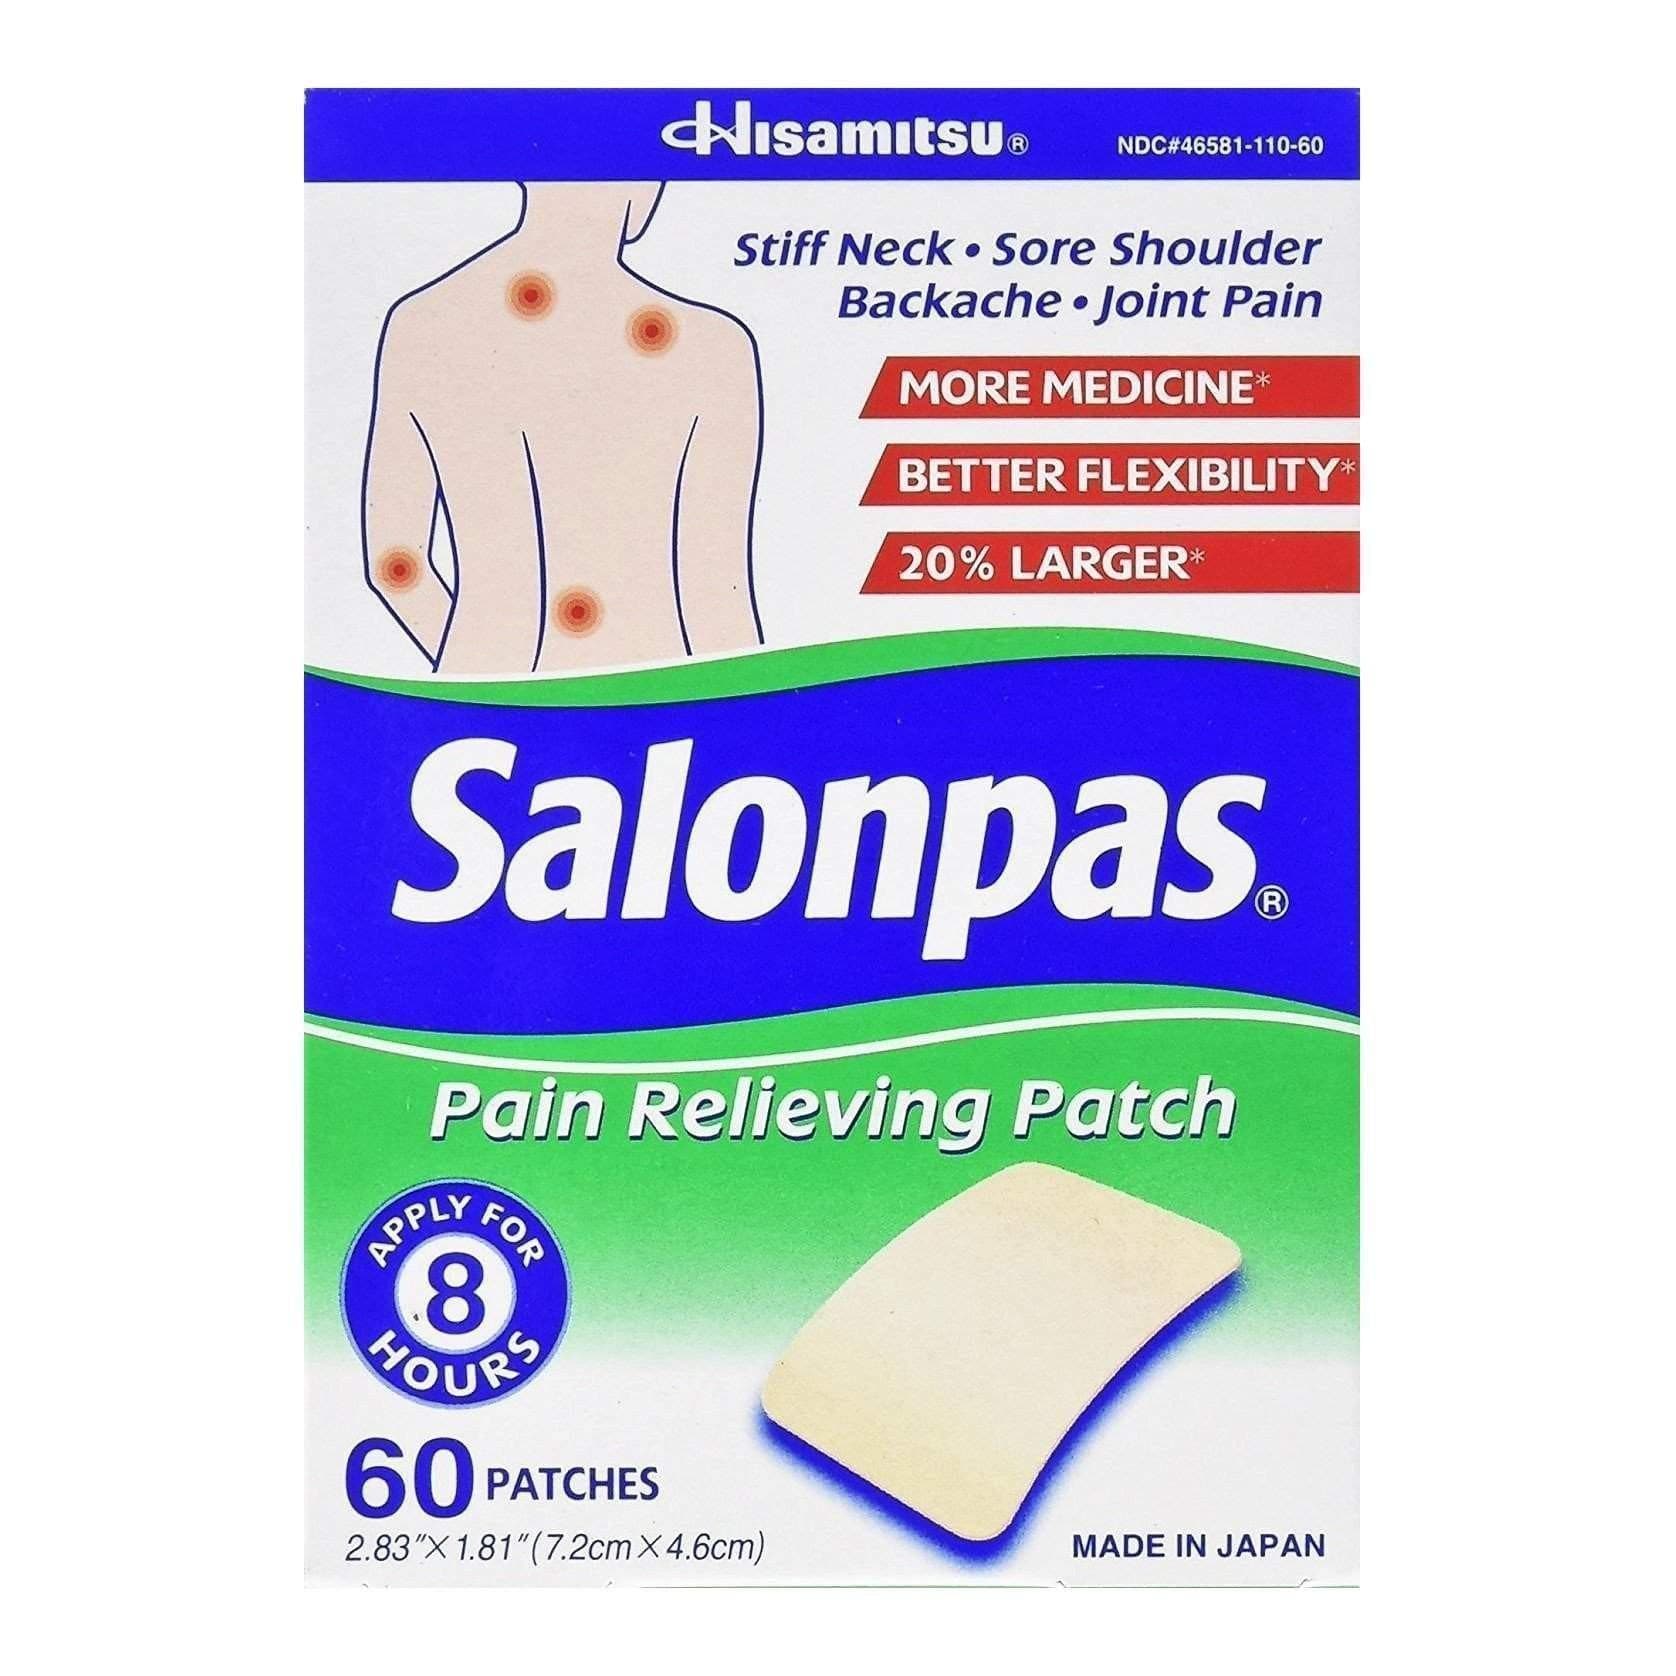 2 Boxes Salonpas Pain Relieving Patch 60 Patches (120 Patches Total) - Buy at New Green Nutrition